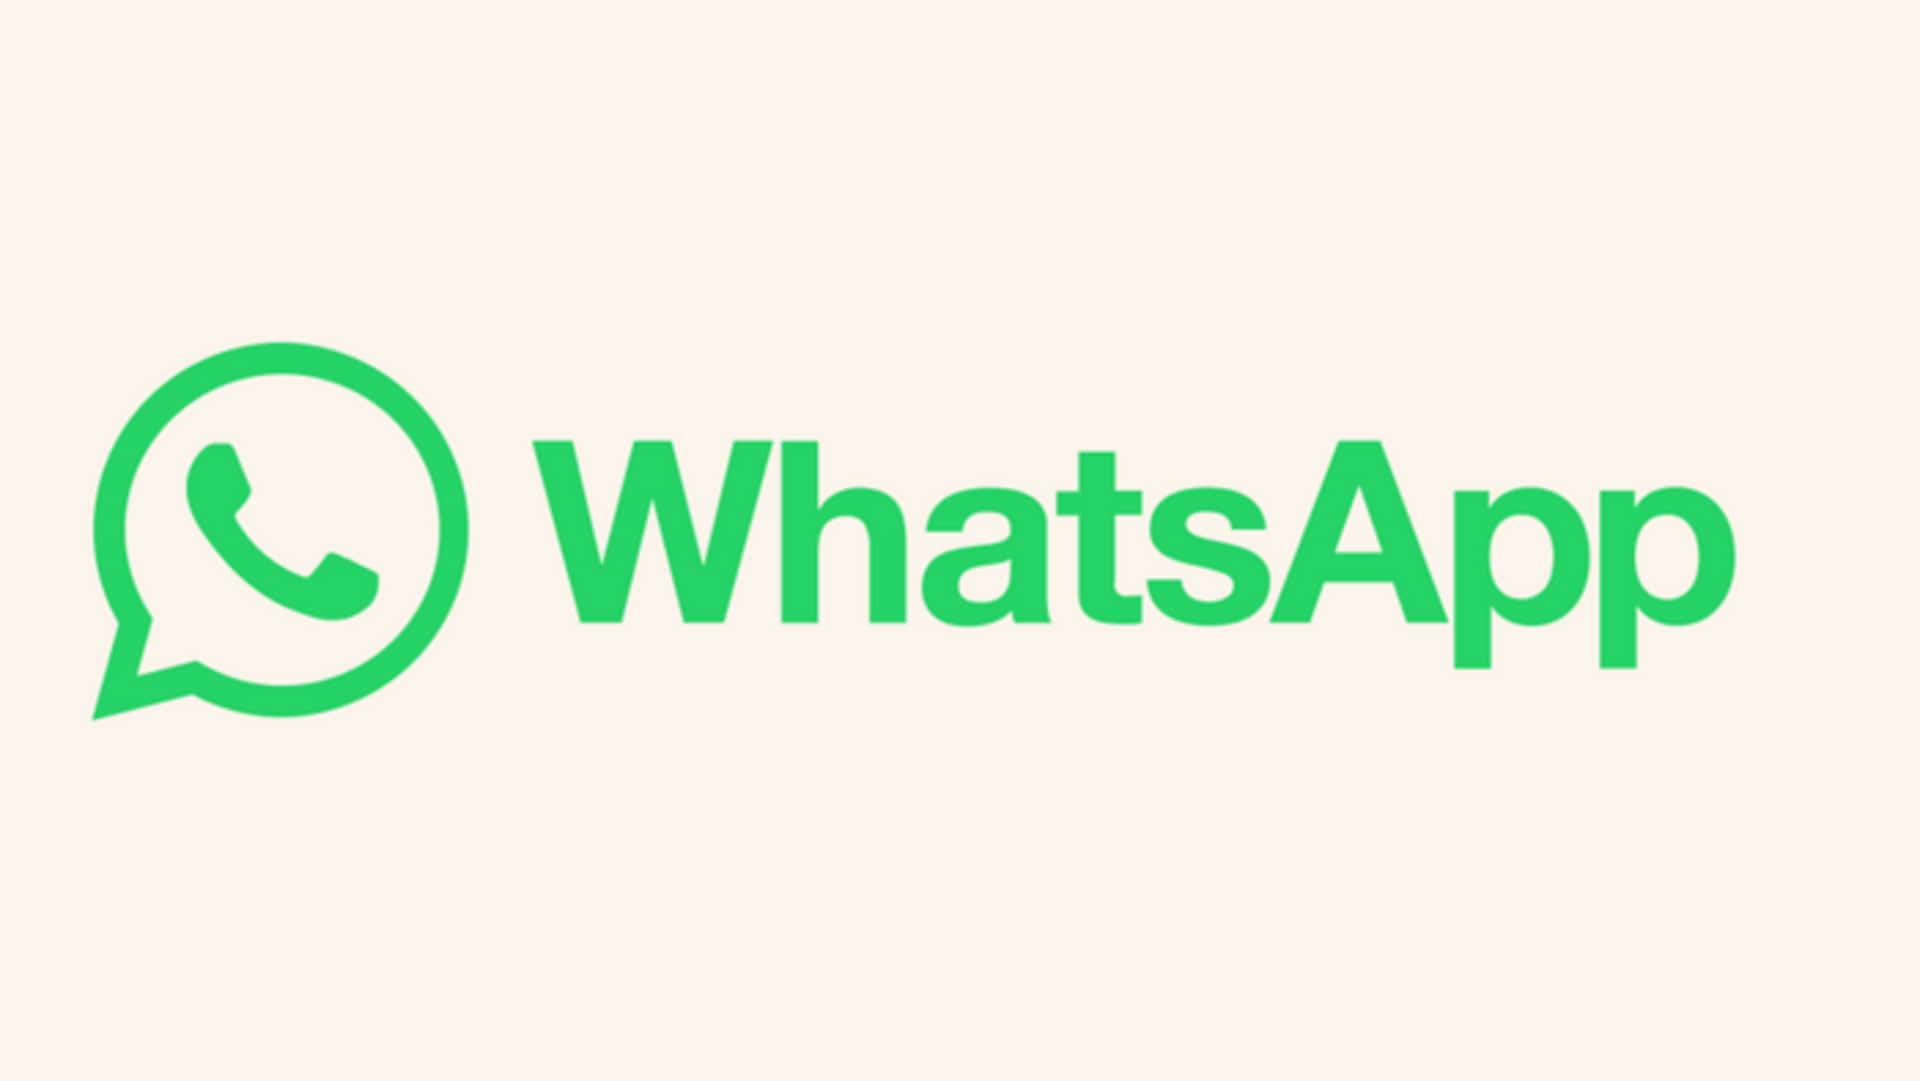 WhatsApp introduces new group settings interface on Android